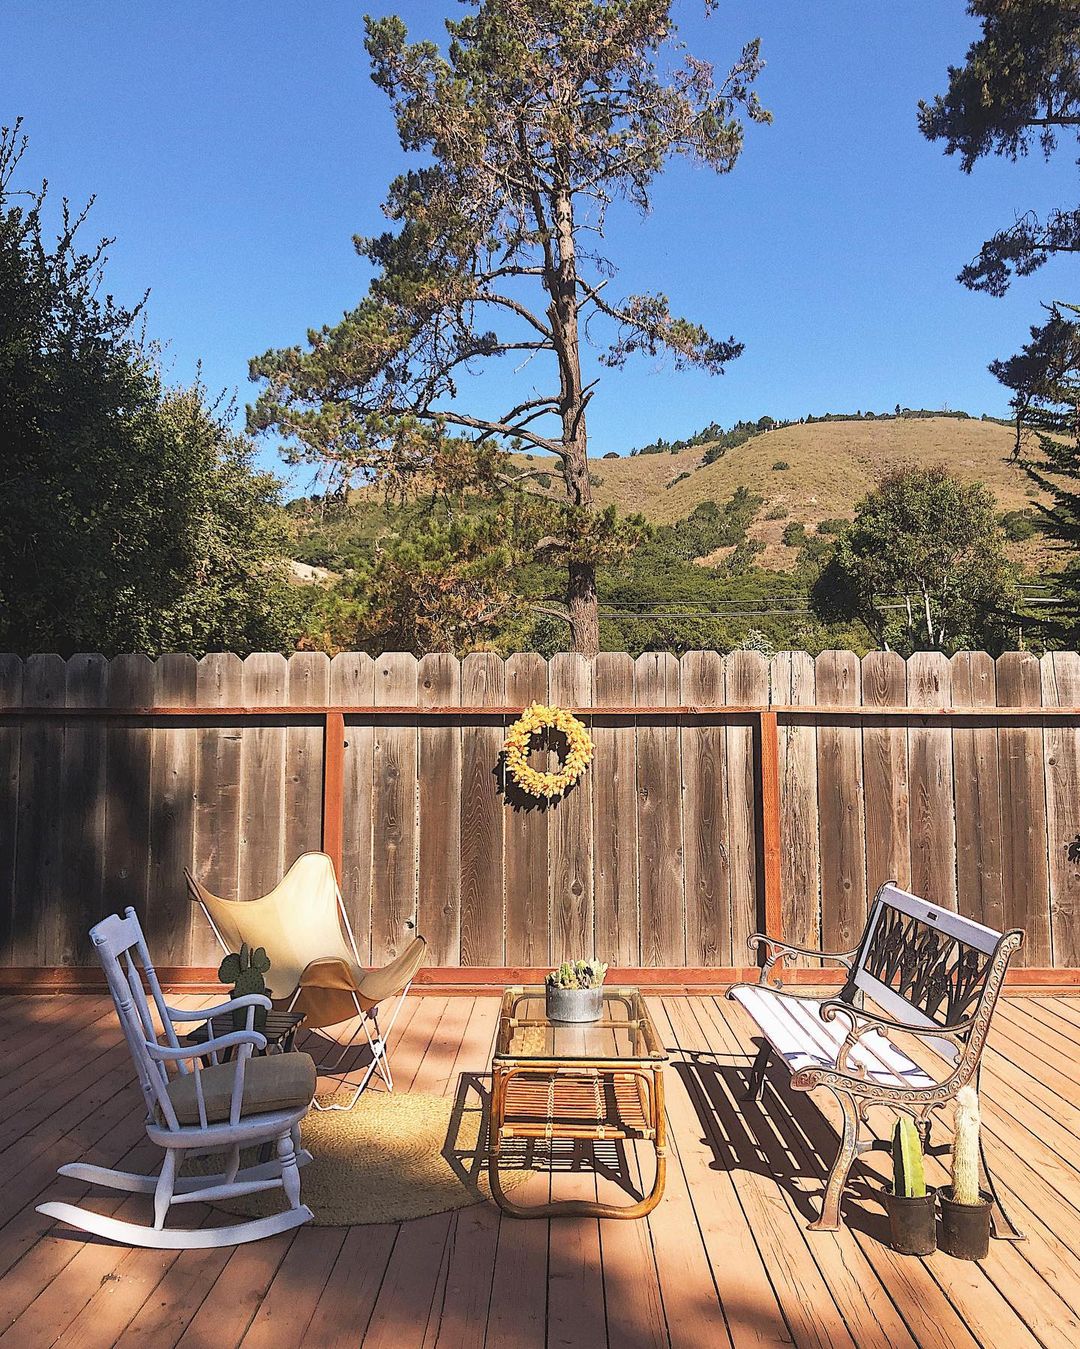 Backyard Sustainable Table and Chairs. Photo by Instagram user @the.heartfelt.homebody